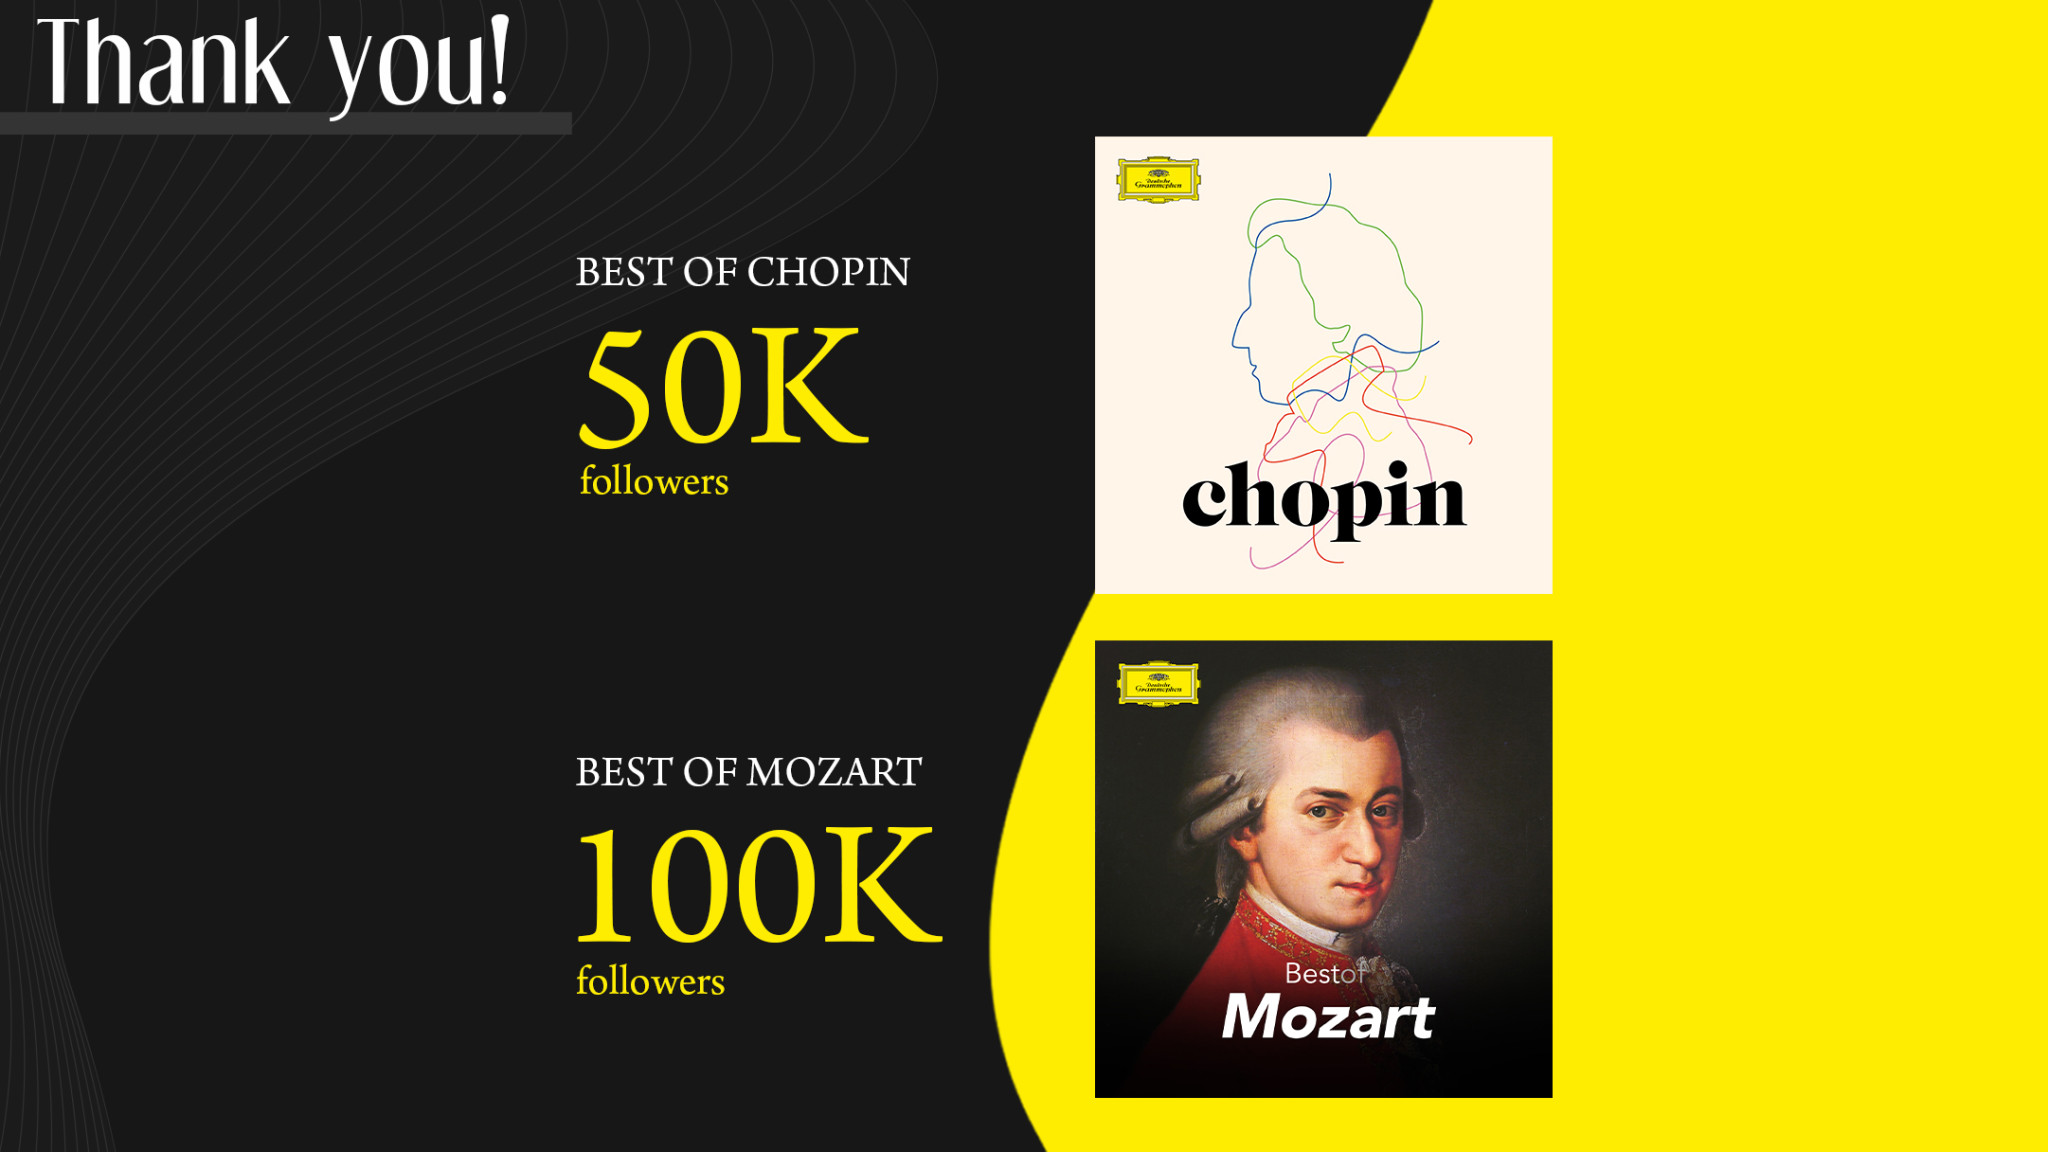 Celebrating 50K and 100K Followers for Chopin and Mozart on Spotify